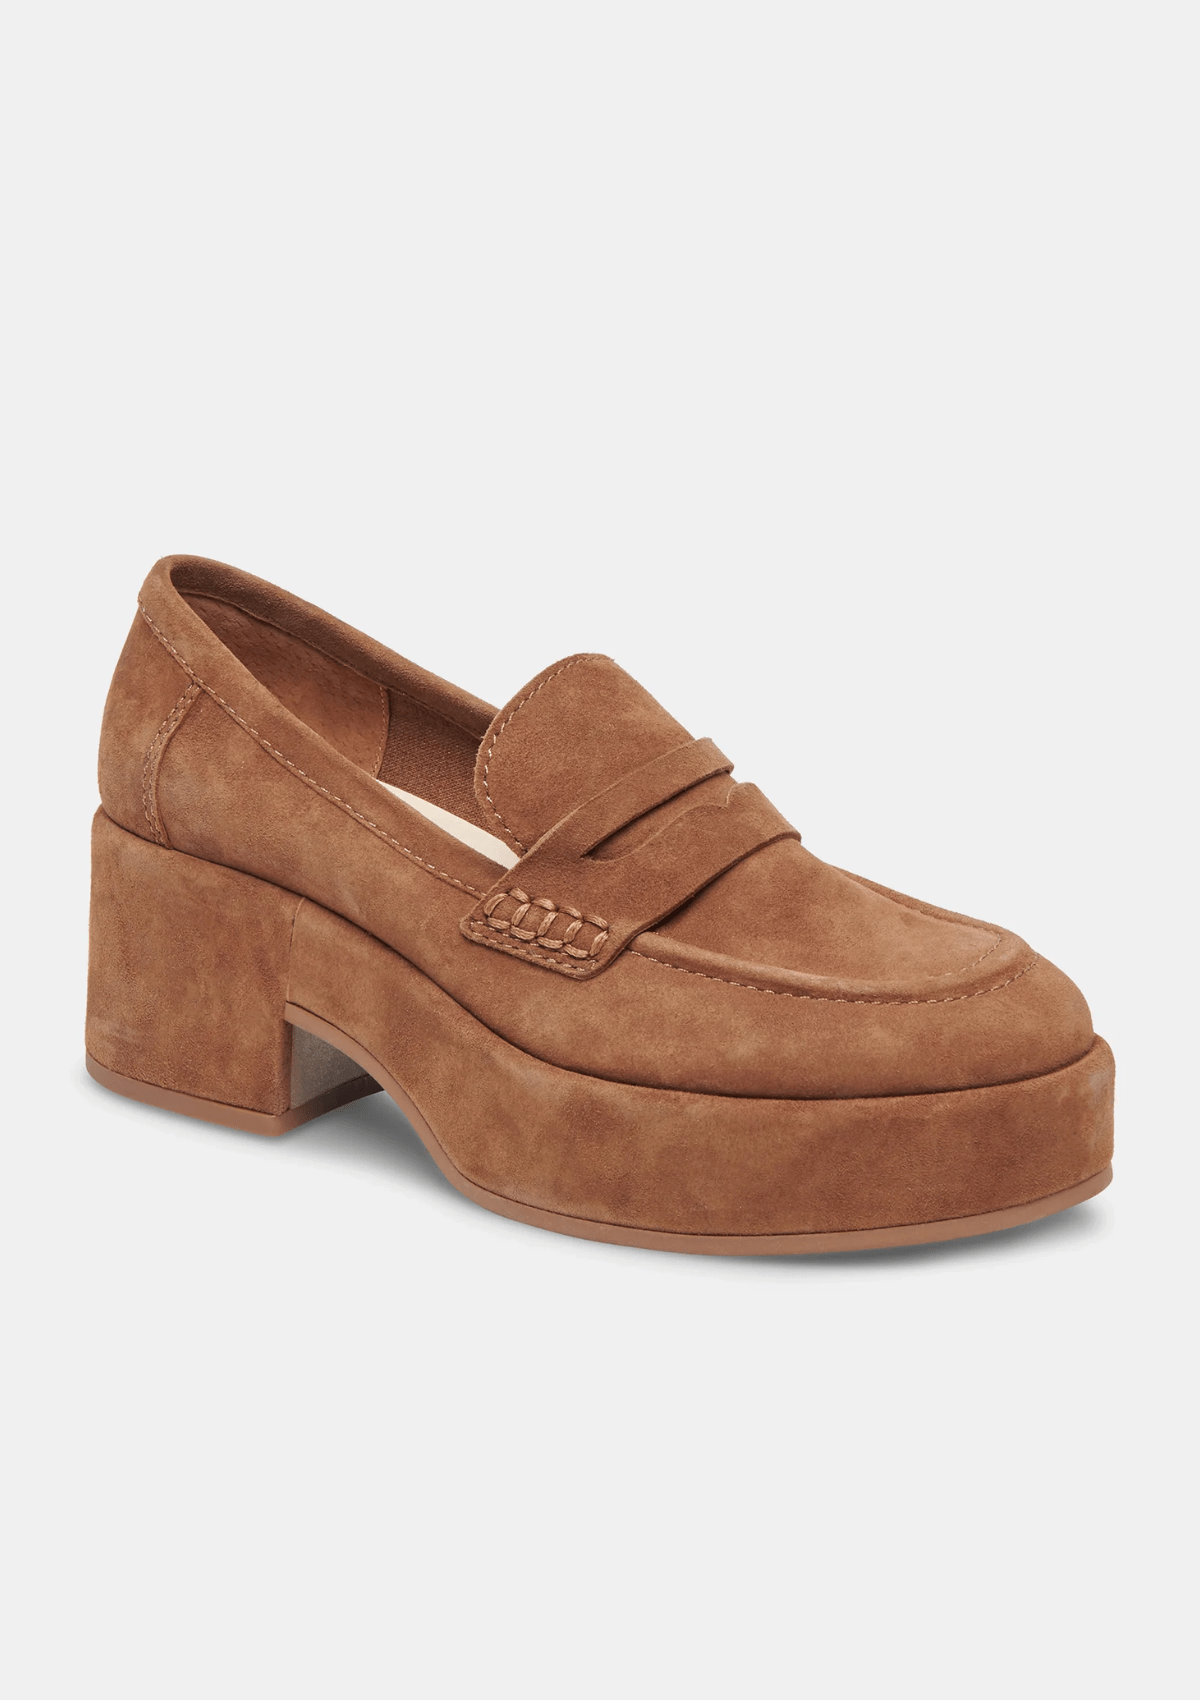 Chestnut Suede Yanni Loafers with Chunky Sole and Exaggerated Heel -Dolce Vita Footwear, Inc.- Ruby Jane-